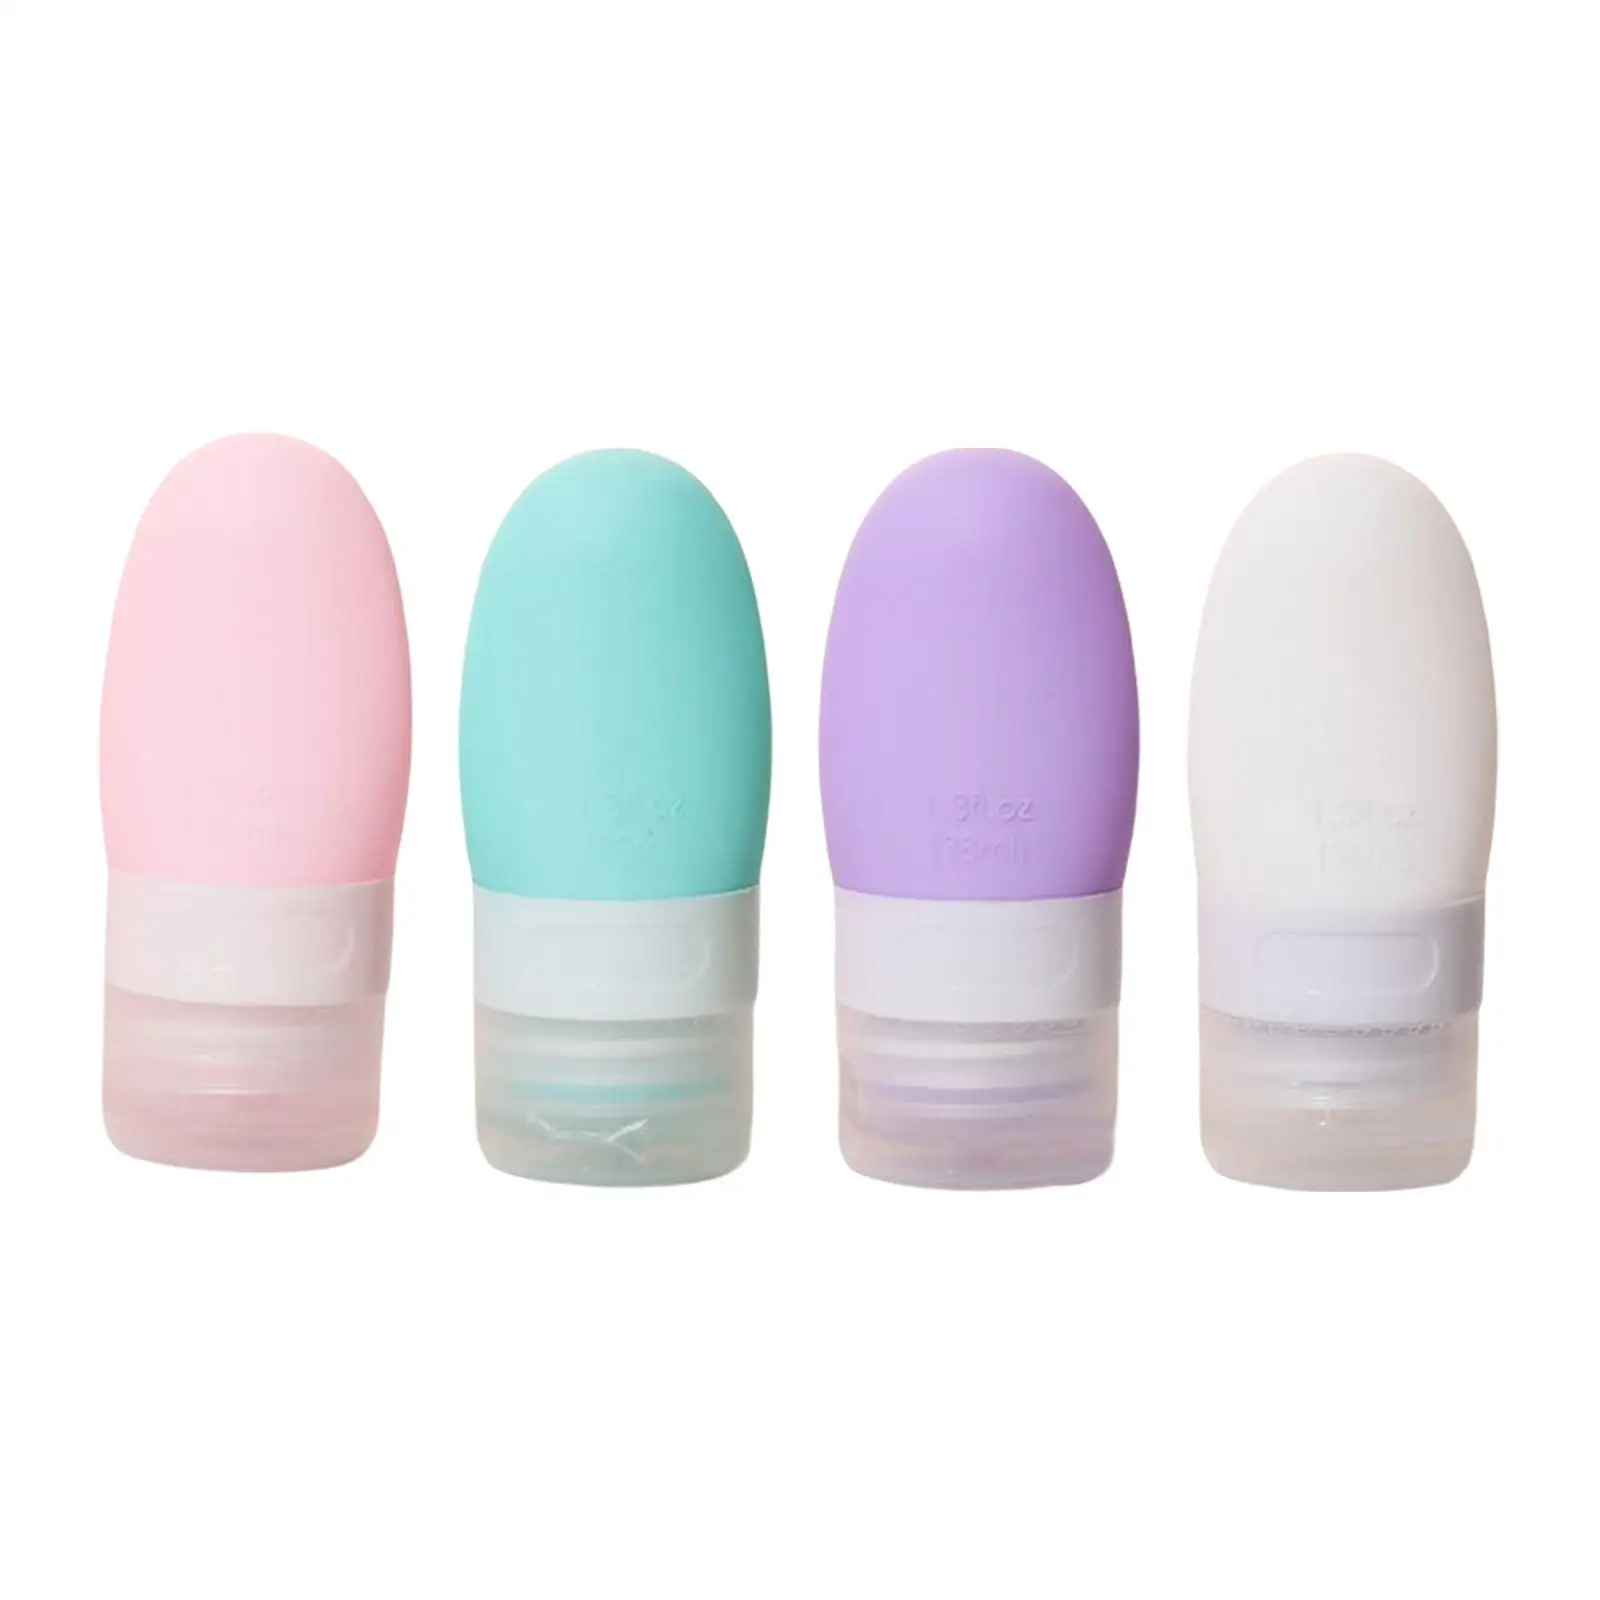 Small Mini Travel Bottle Travel Accessories Silicone Liquids Containers for Lotion Body Wash Liquids Cosmetic Liquids Shower Gel